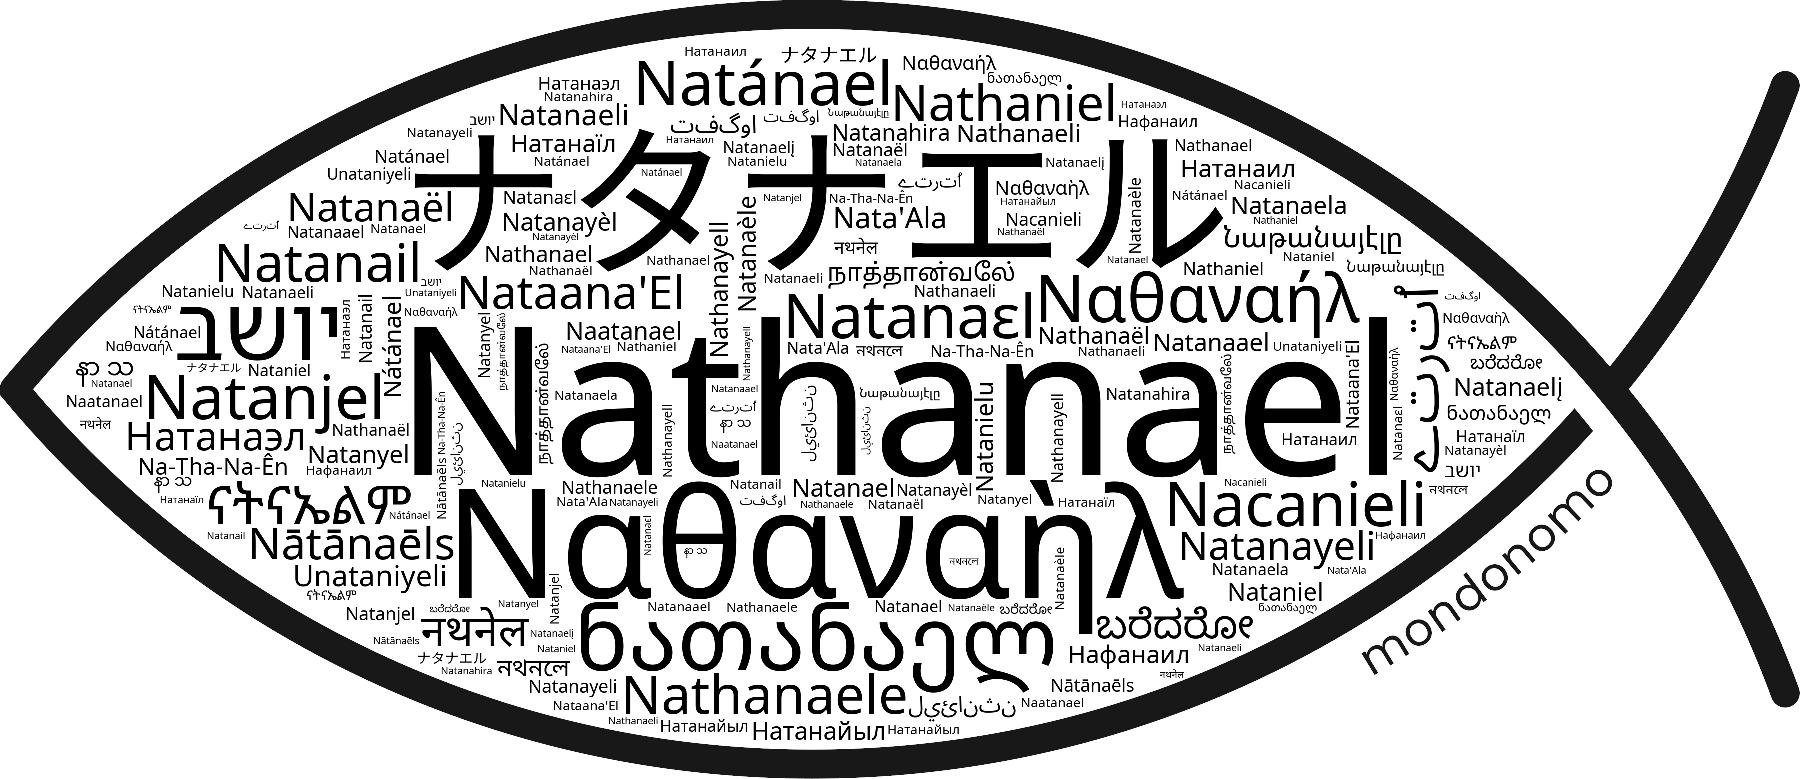 Name Nathanael in the world's Bibles